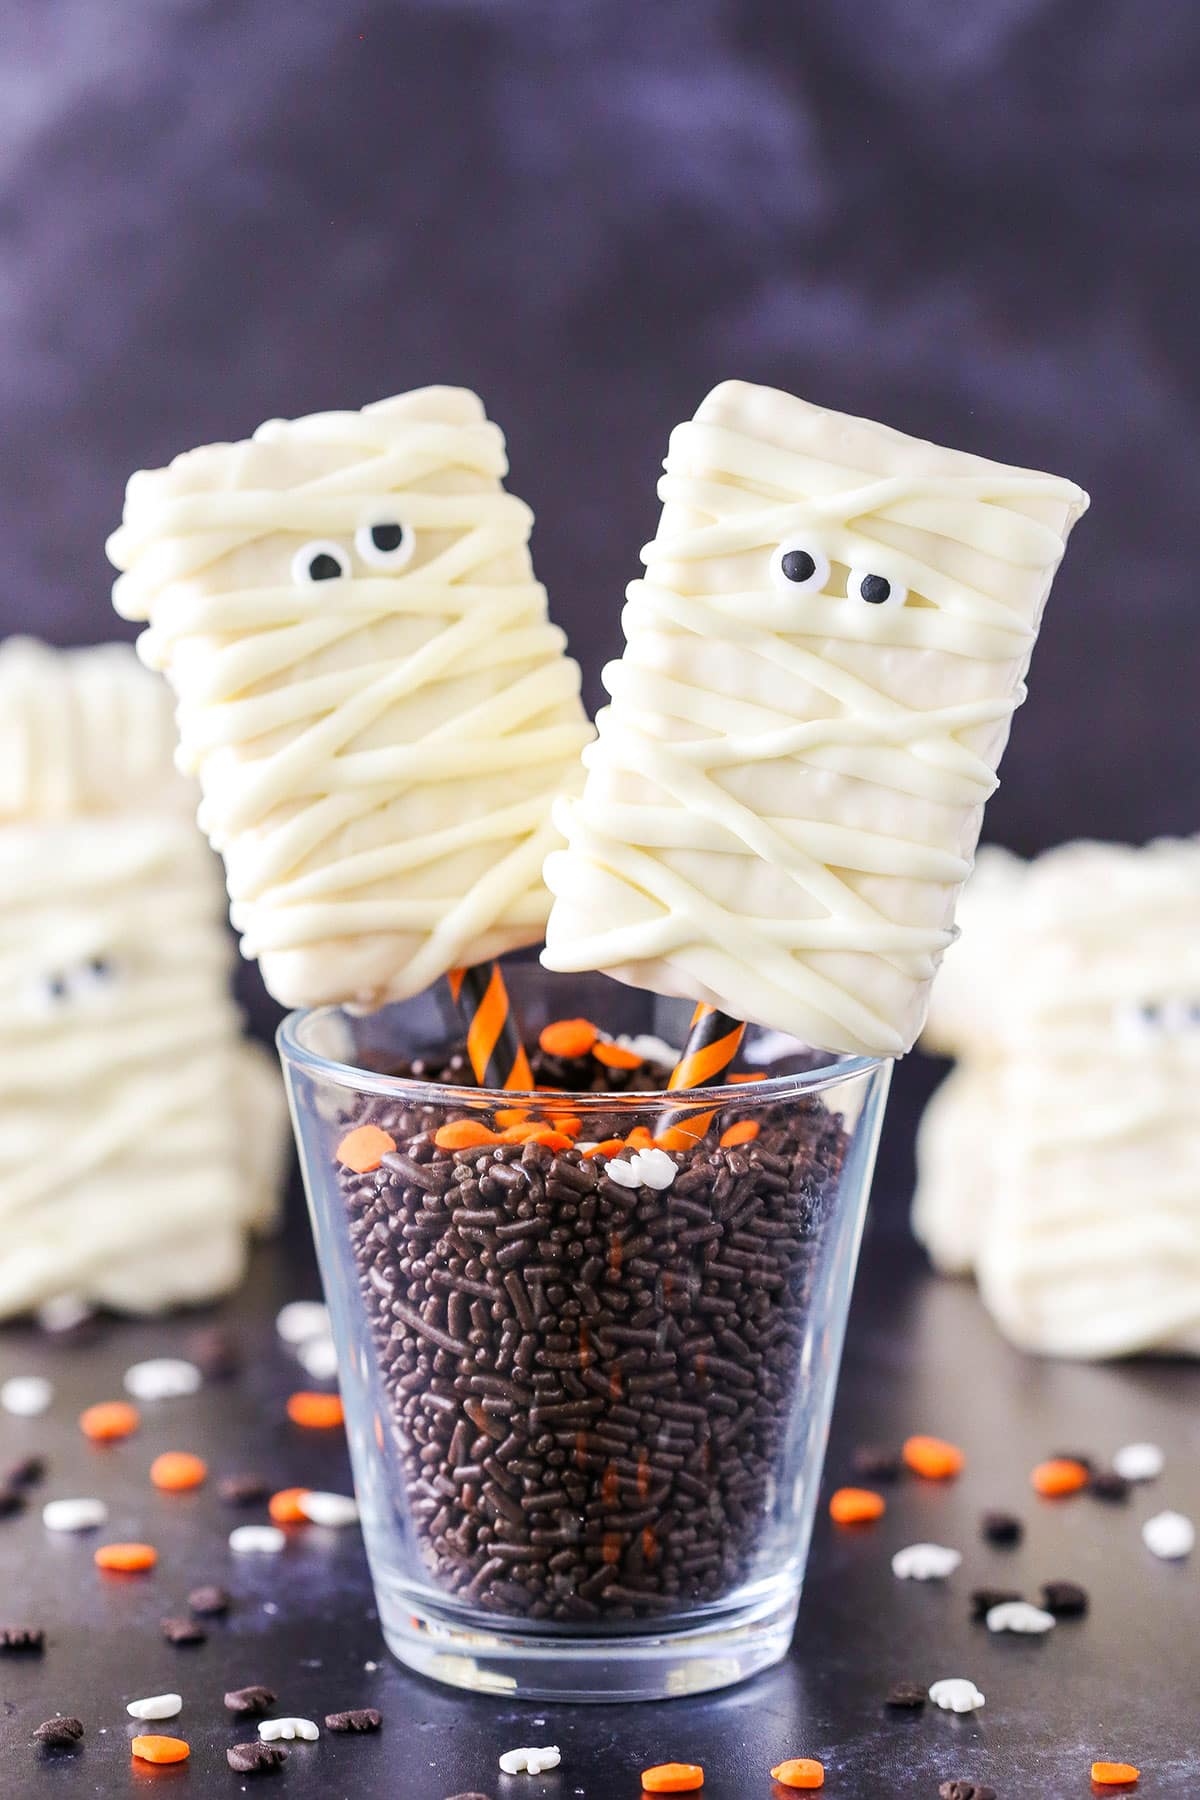 Two Mummy Rice Krispies Treats on orange and black straws in a glass filled with chocolate sprinkles